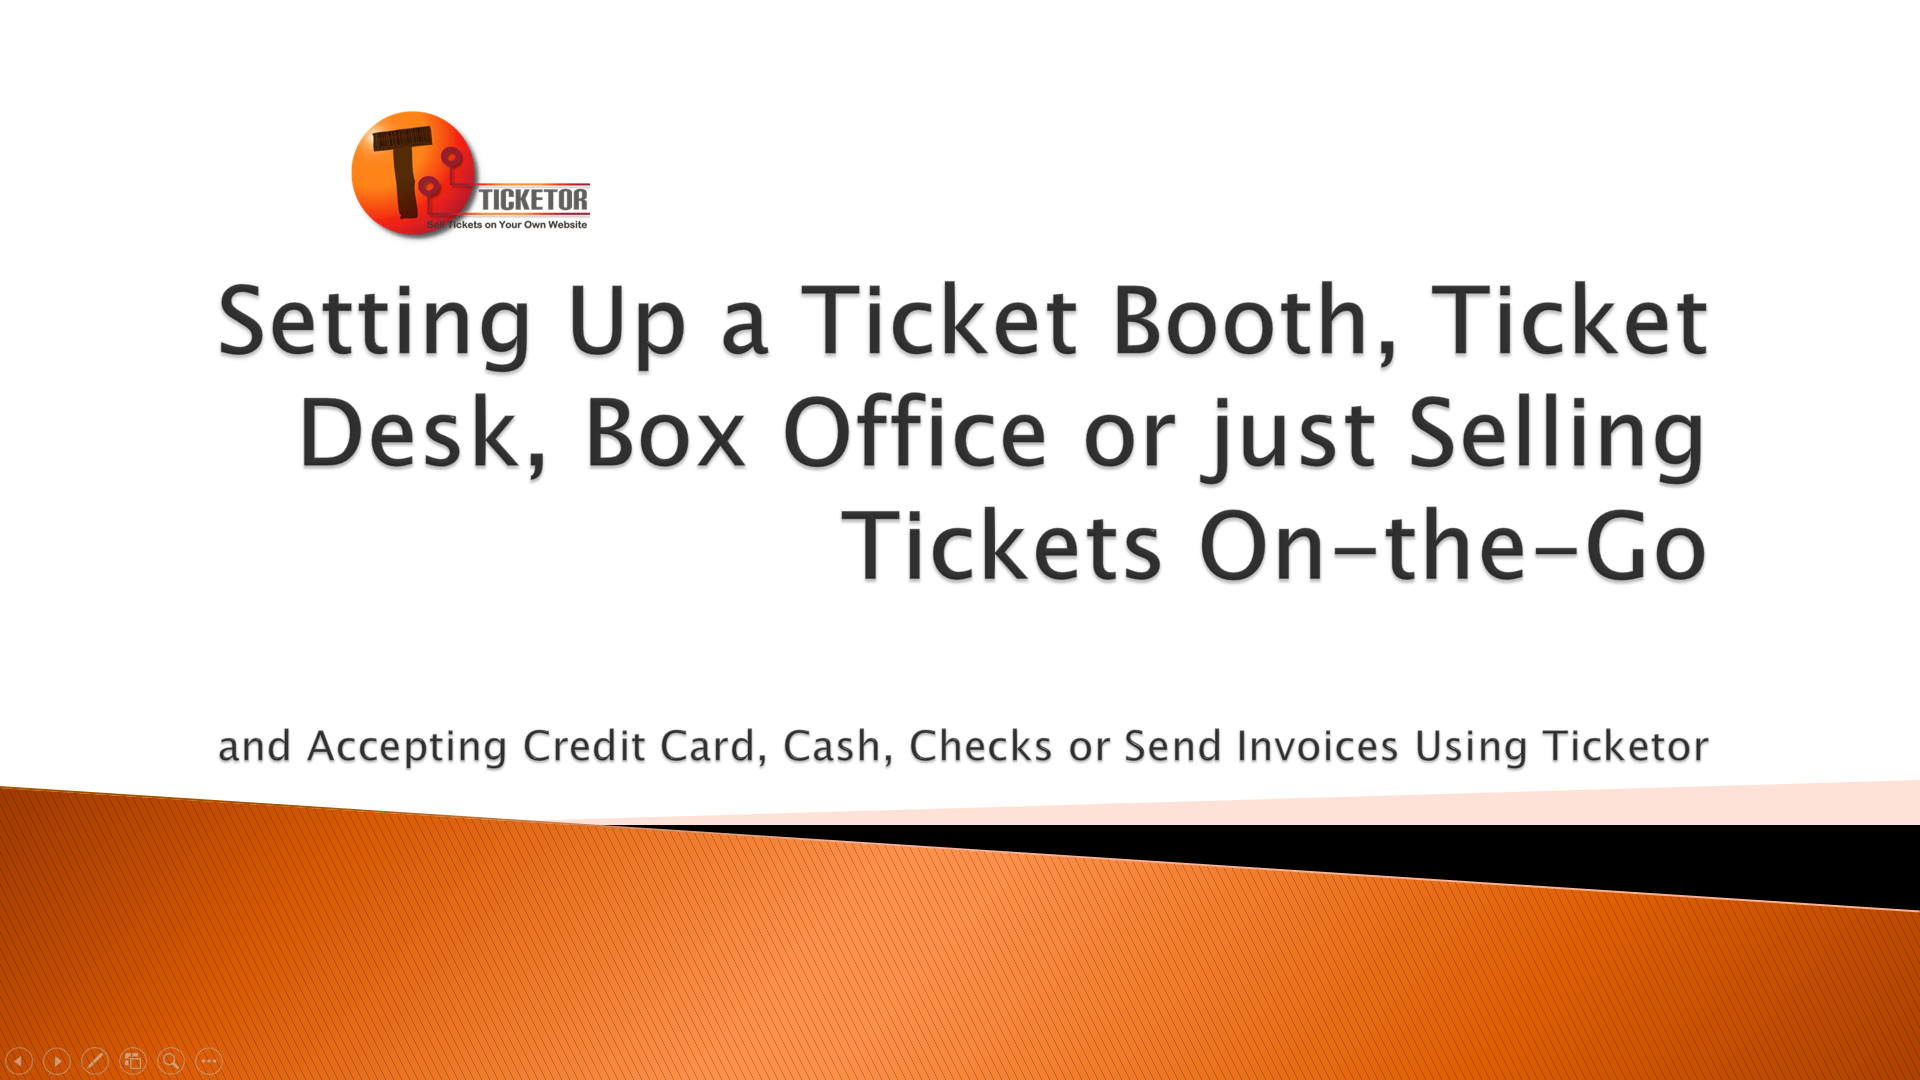 How to Set Up a Ticket Booth, Ticket Desk, Box Office or just Sell Tickets On-the-Go and Accept Credit Card, Cash, Checks or Send Invoices Using Ticketor